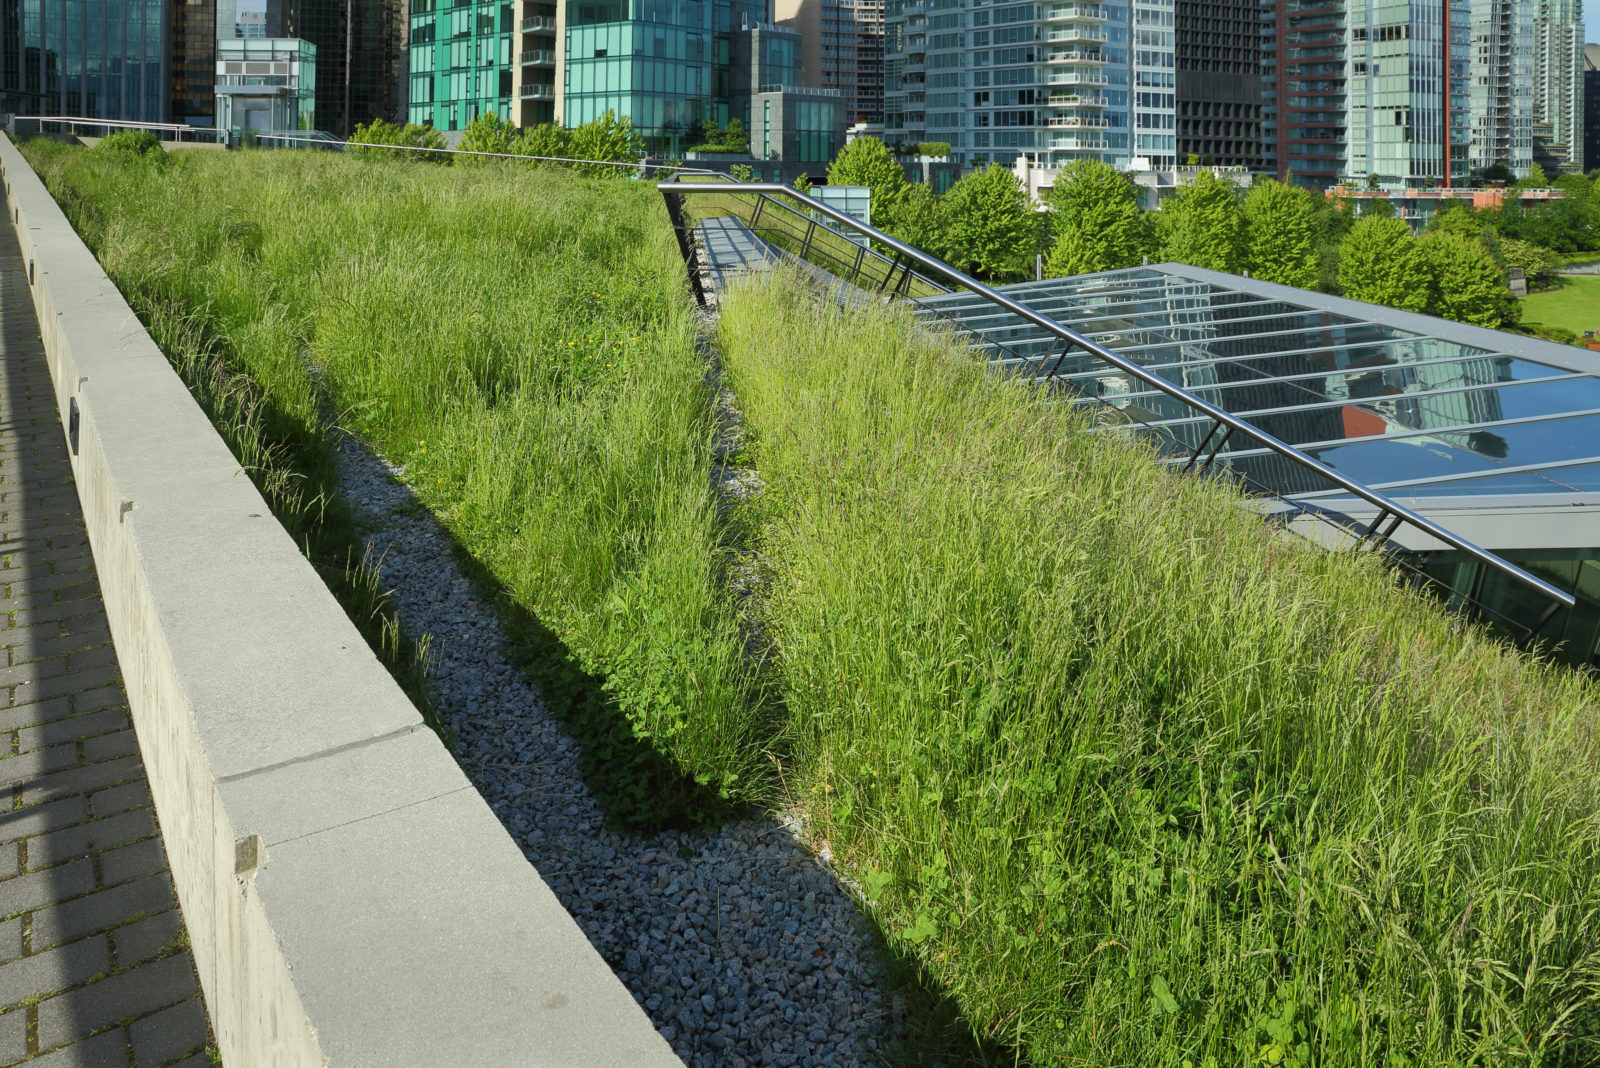 A portion of the new Vancouver Convention Center environmentally friendly, lush, 6 acre green roof.